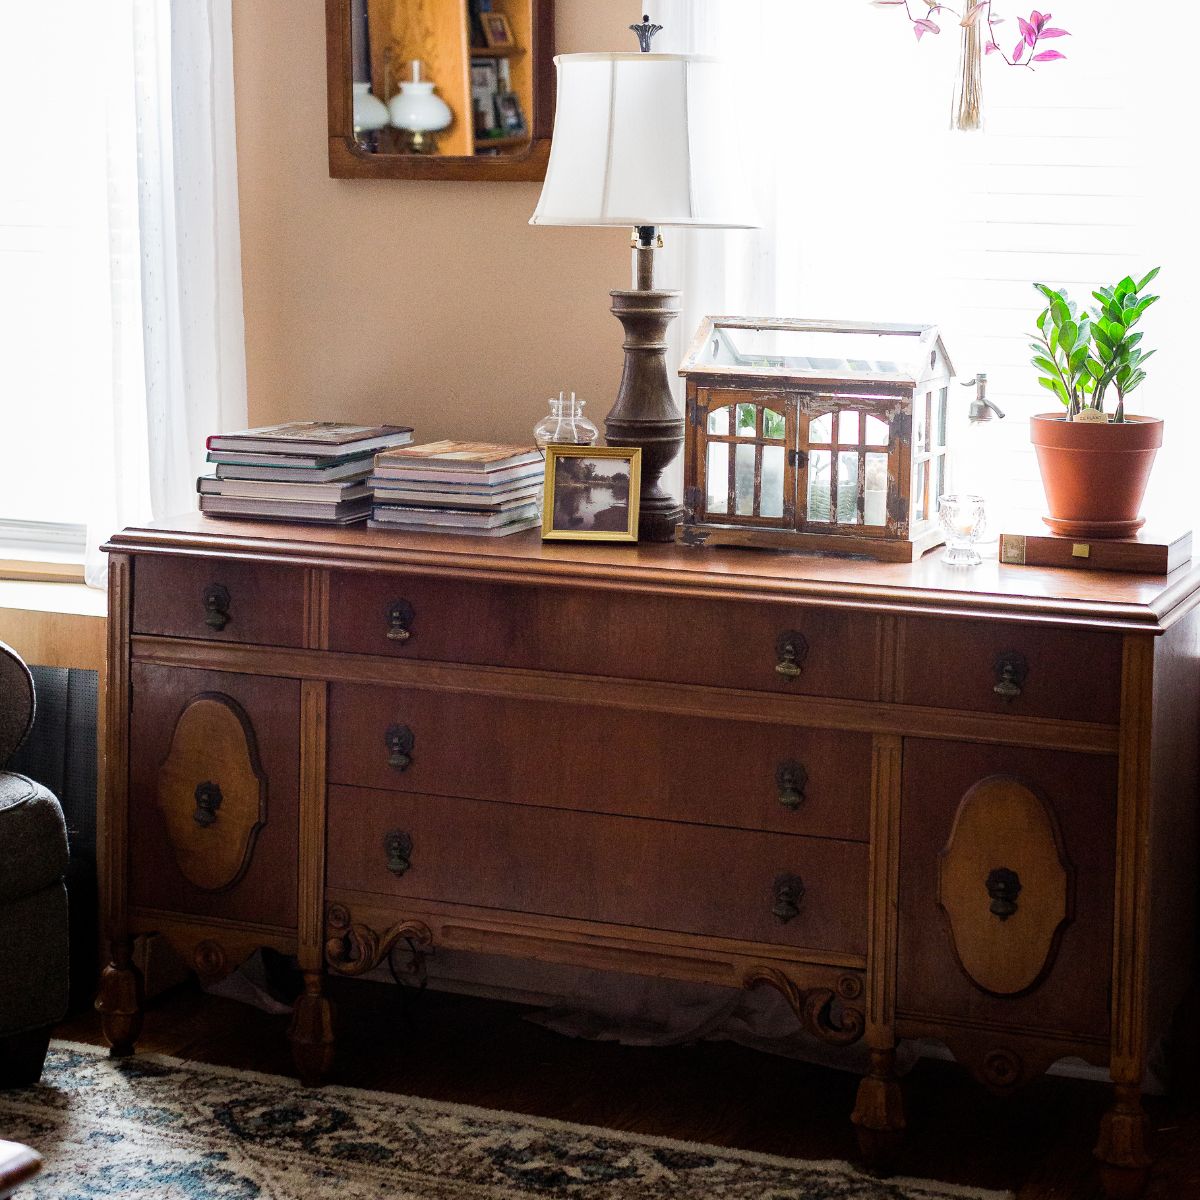 5 Uses for an Antique Sideboard-LinenandWildflowers.com | A sideboard styled with a lamp, stacks of decor books. terraium with house plants, a small oil lamp, candle & a plant resting on a old cigar box.